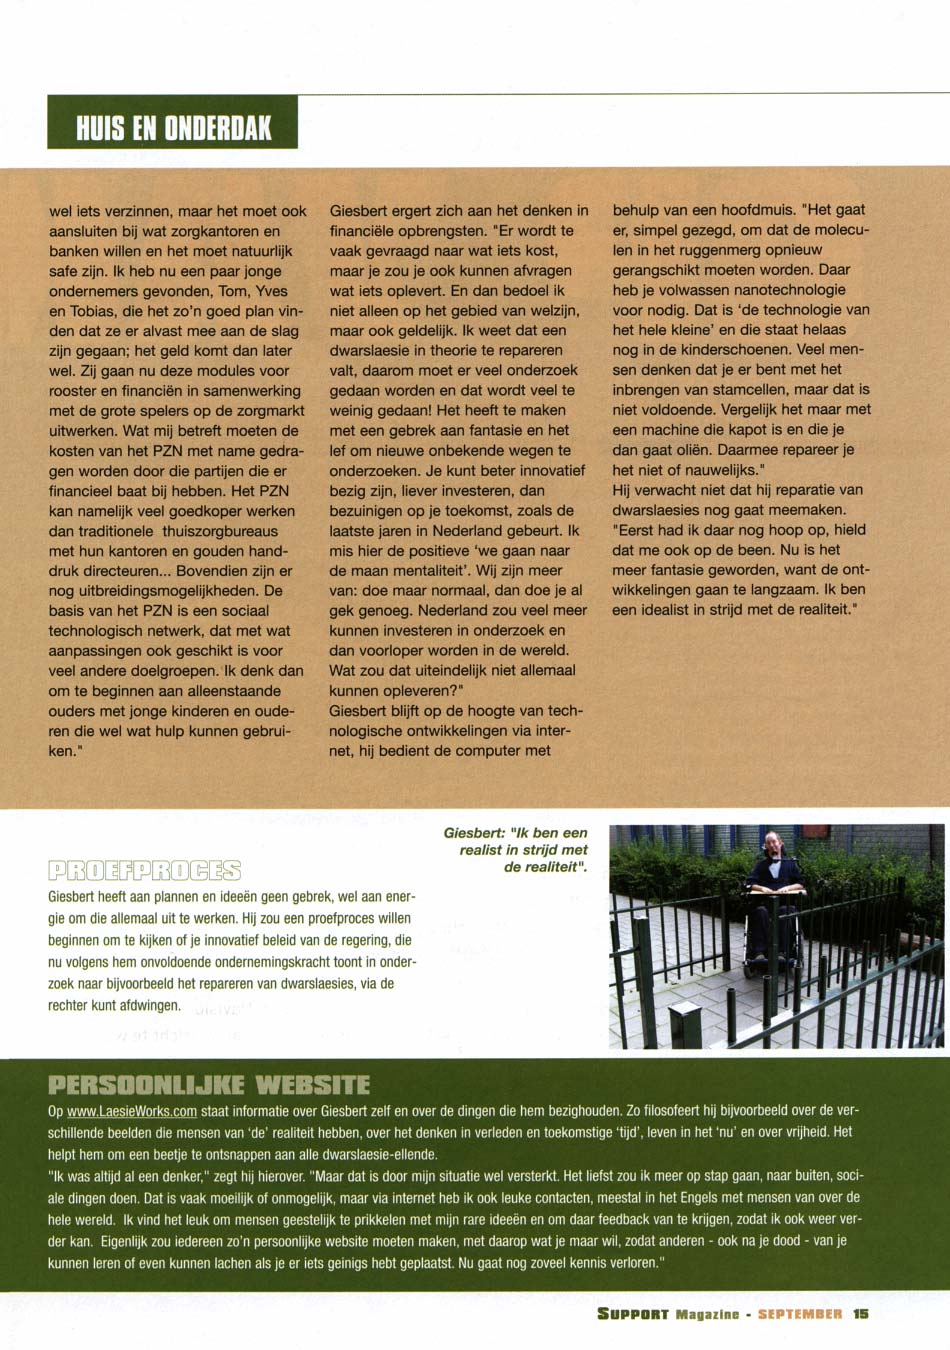 Support magazine interview Nationale Hulpgids 3